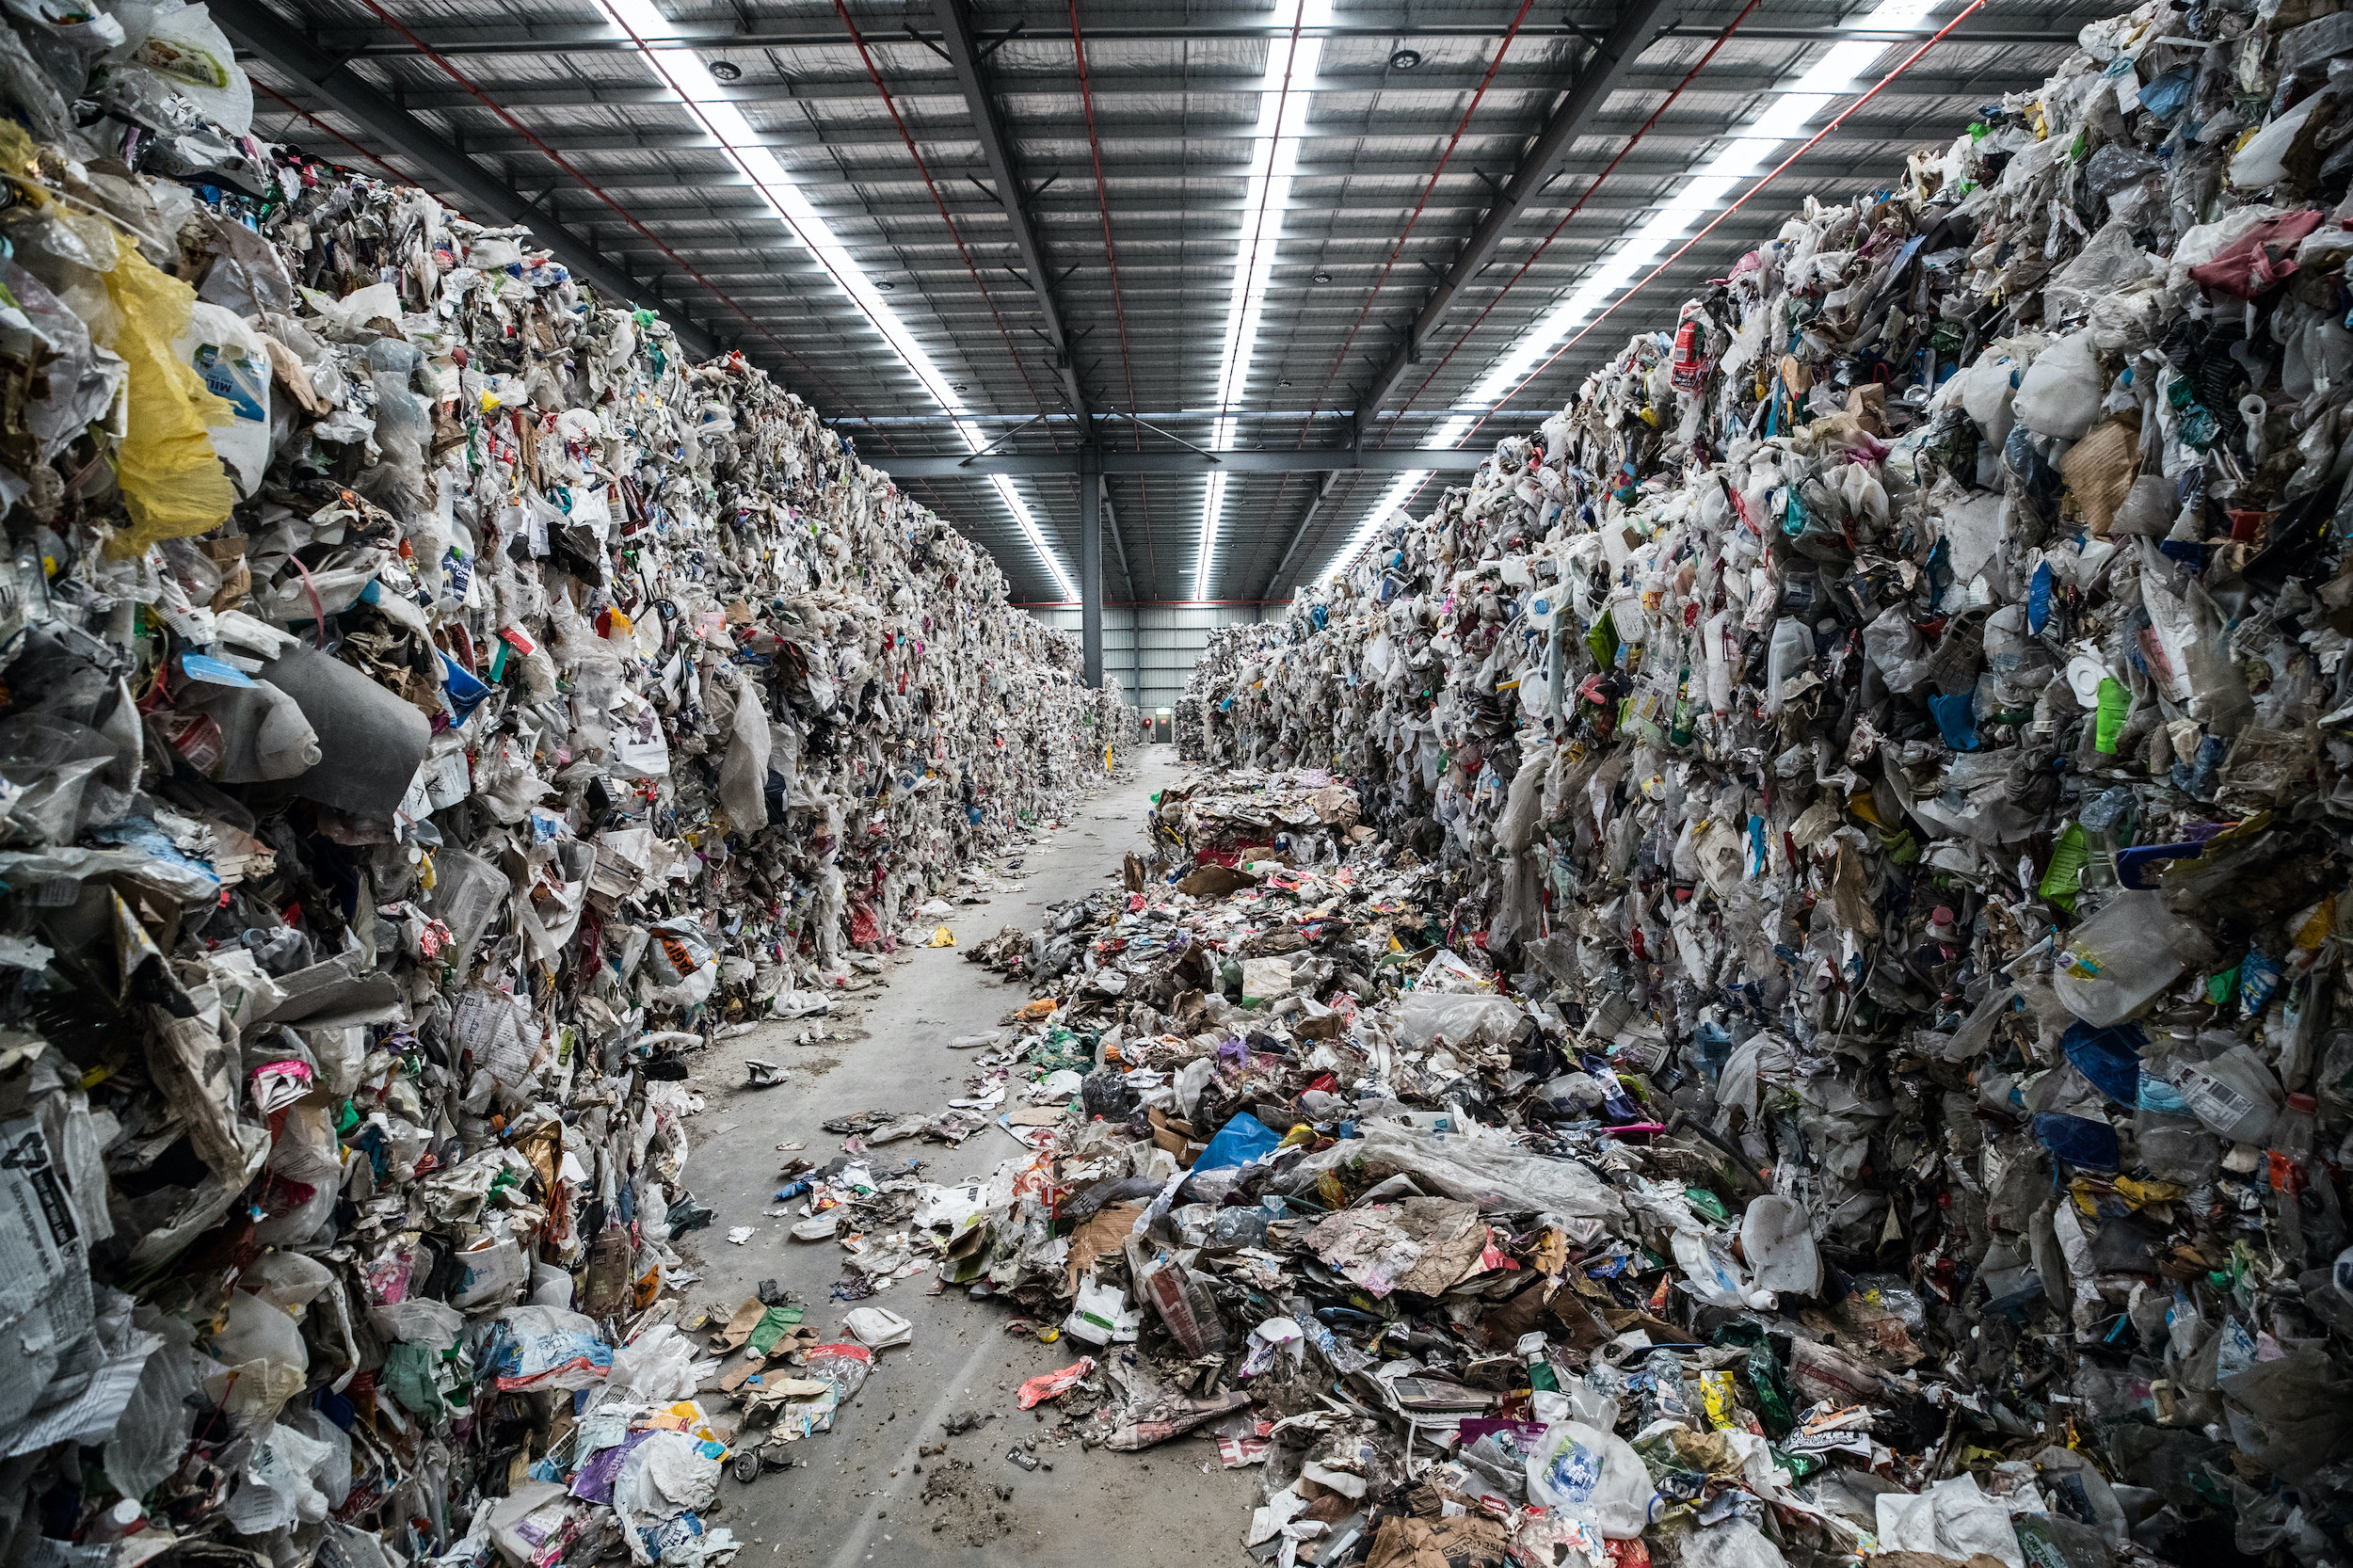 Trash and recycling is seen inside a warehouse in Australia